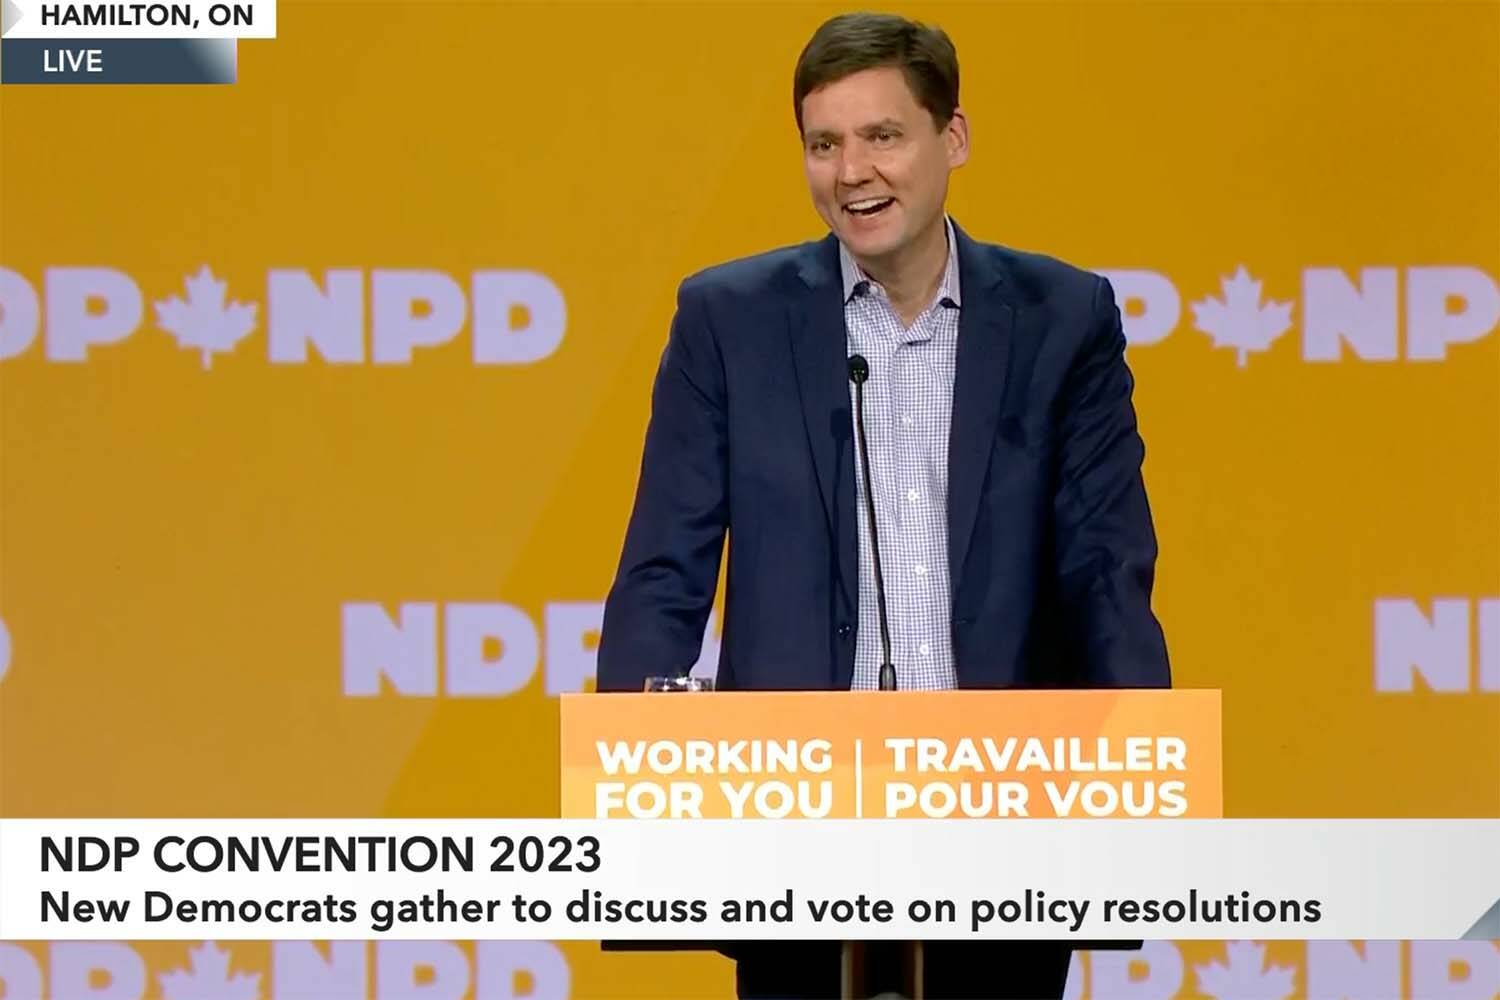 Premier David Eby spoke to federal New Democrats in Hamilton, Ont. Friday (Oct.13) in warning against US-style populism coming to Canada. (Screencap)